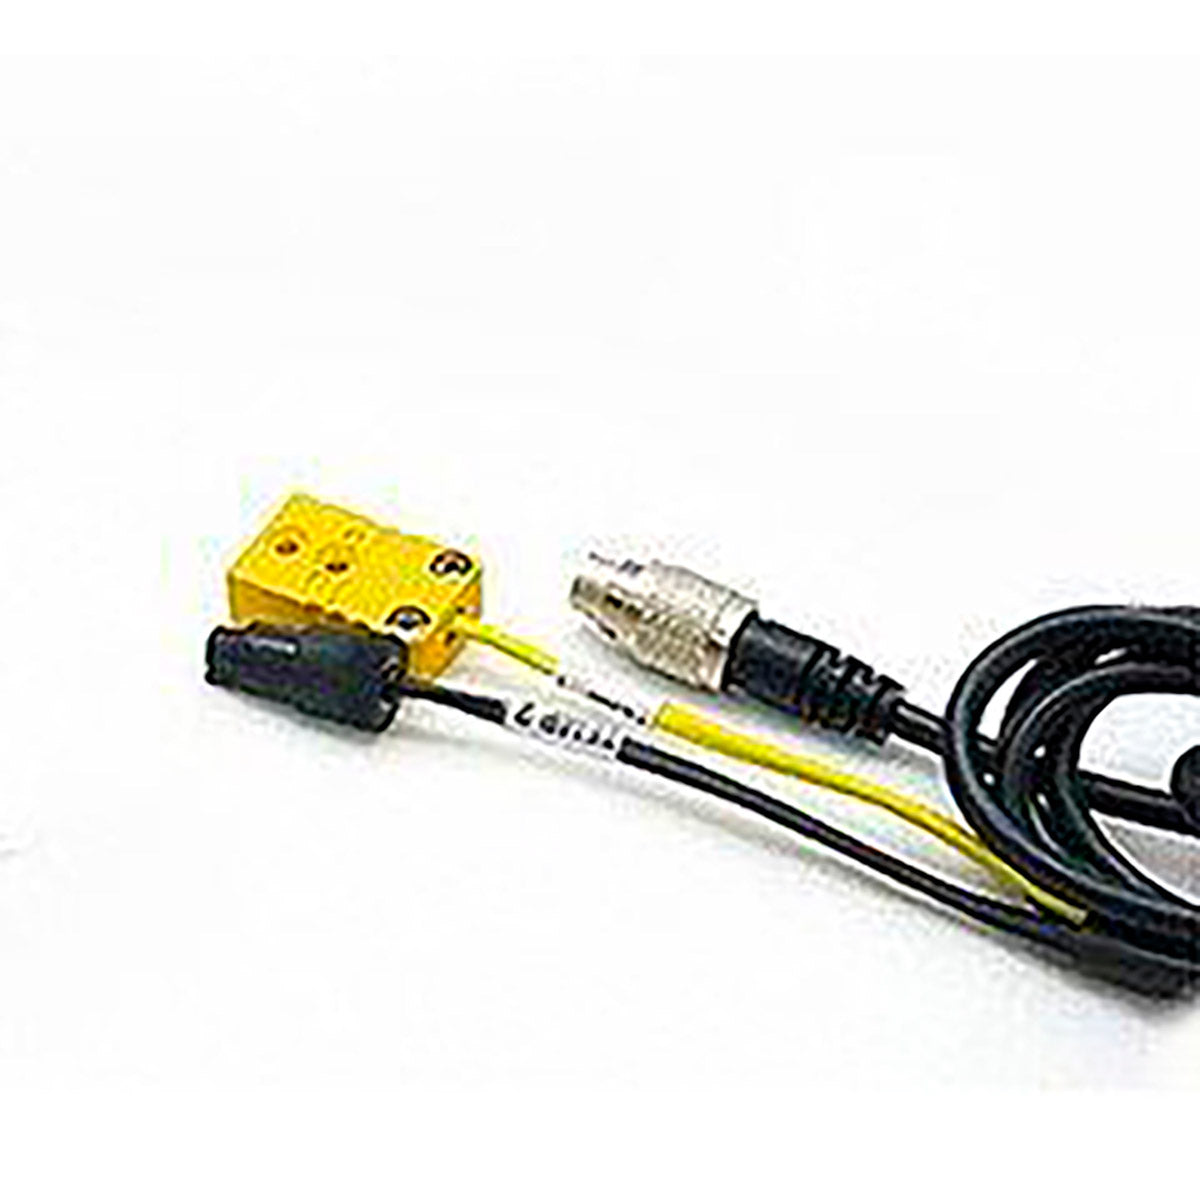 MyChron 2T Ext Cable 1TC 1TR - 1 x Yellow Square K Type & 1 x Round Black Connector